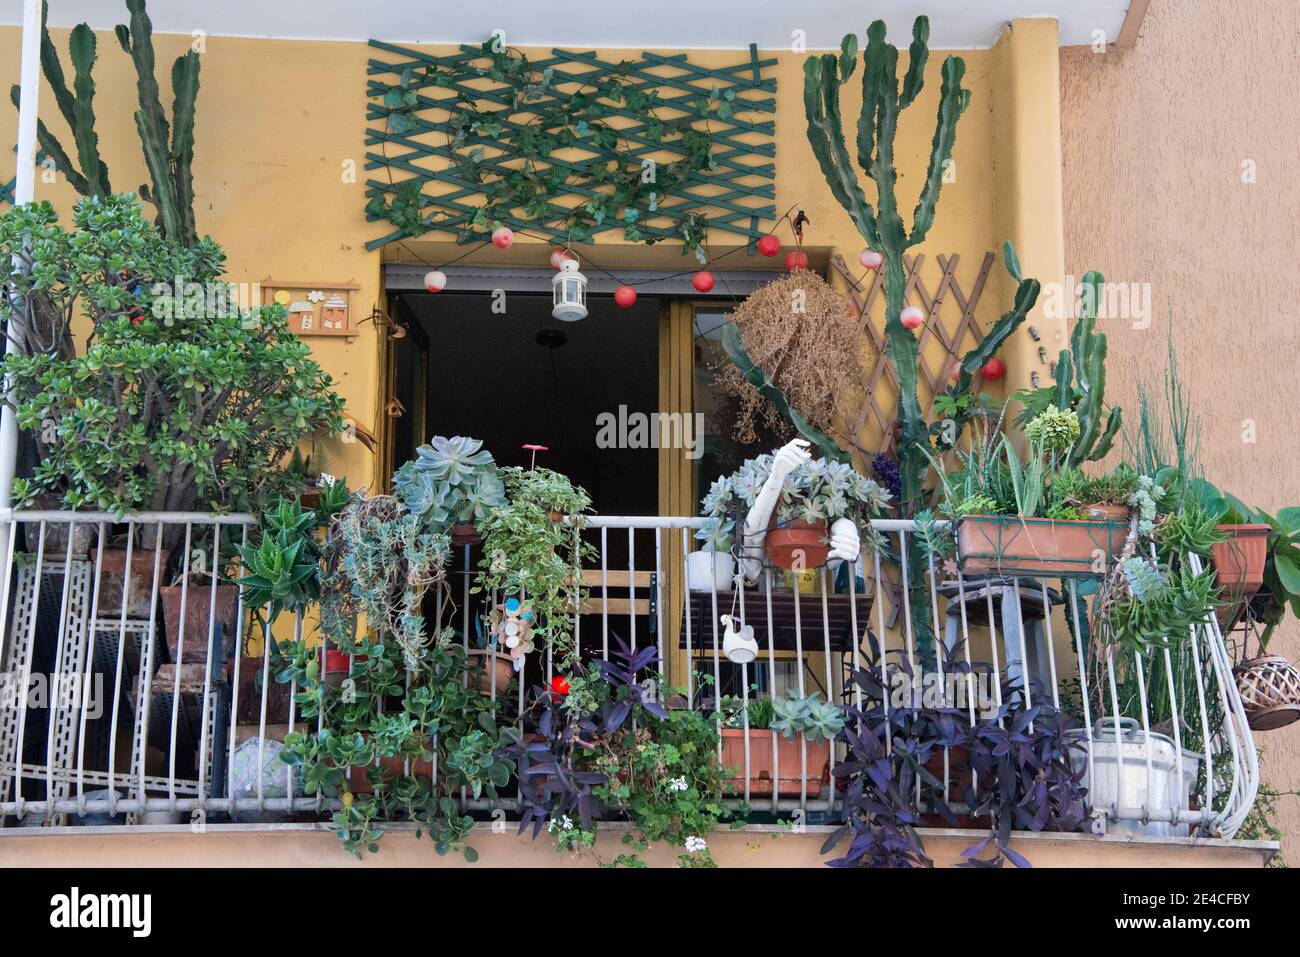 Balcony overcrowded with plants and decorative material Stock Photo